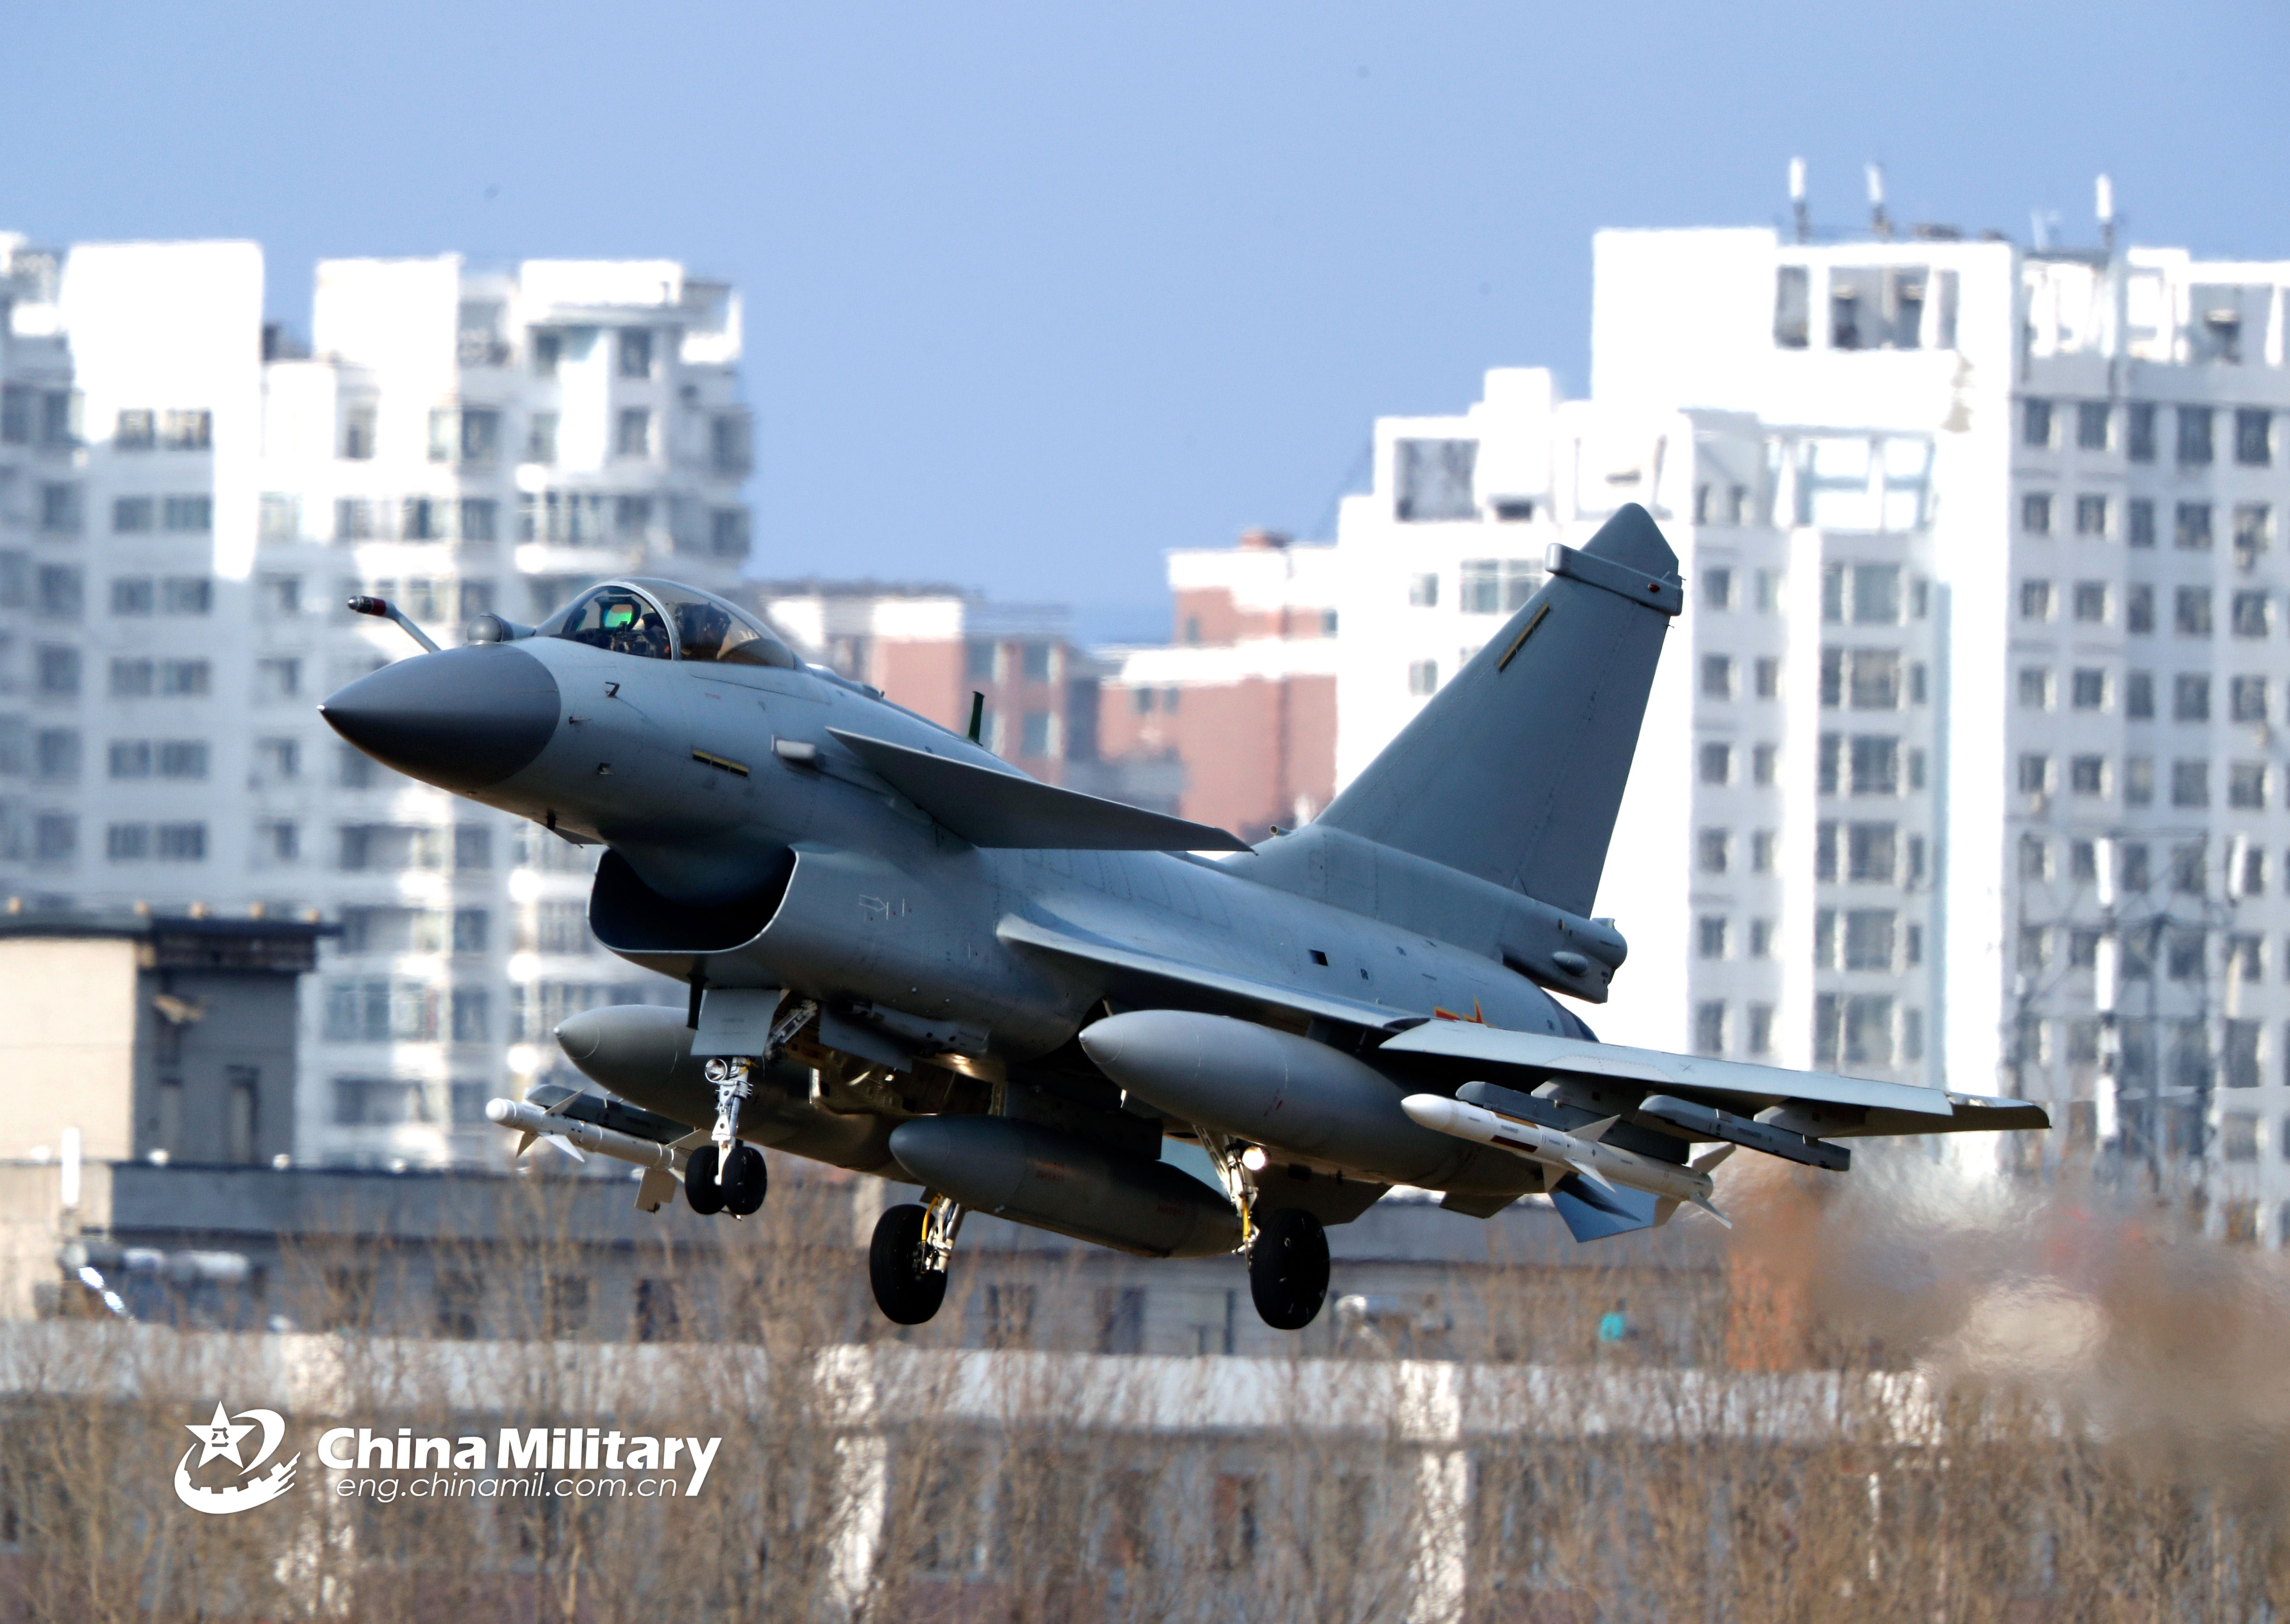 j-10 fighter jets take off - china military